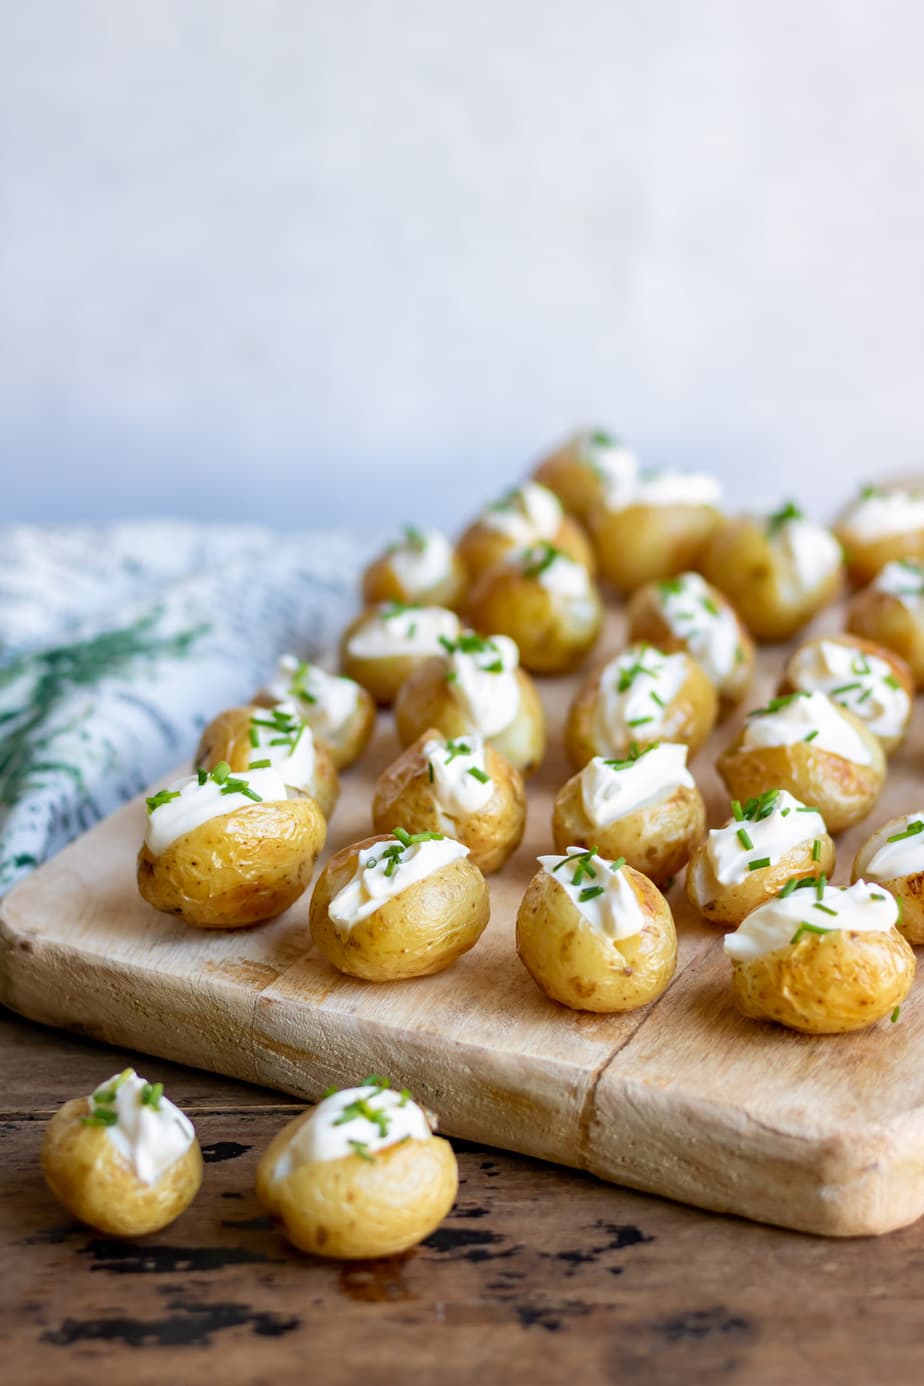 Rows of mini baked potatoes with sour cream on a board.